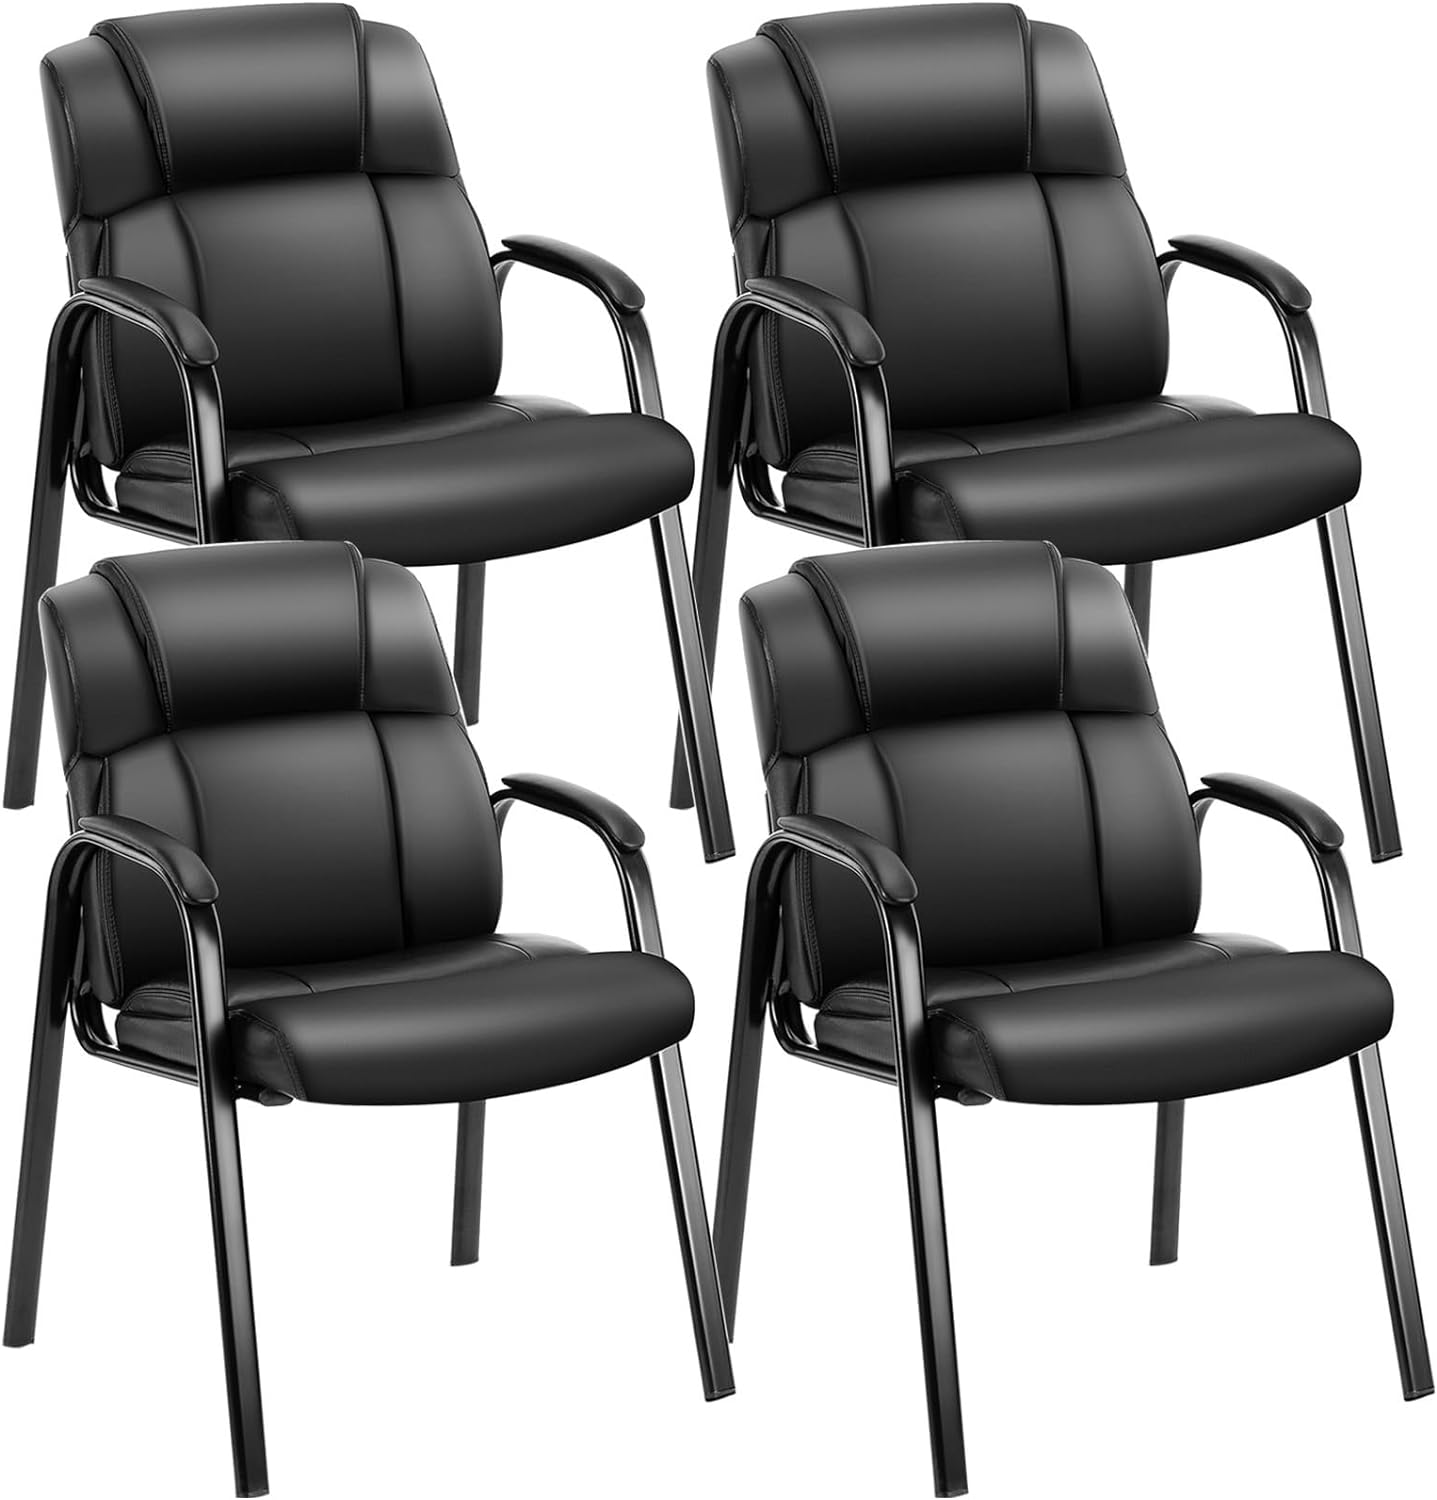 Snag Your Discount! edx Leather Waiting Room Chairs - Set of 4